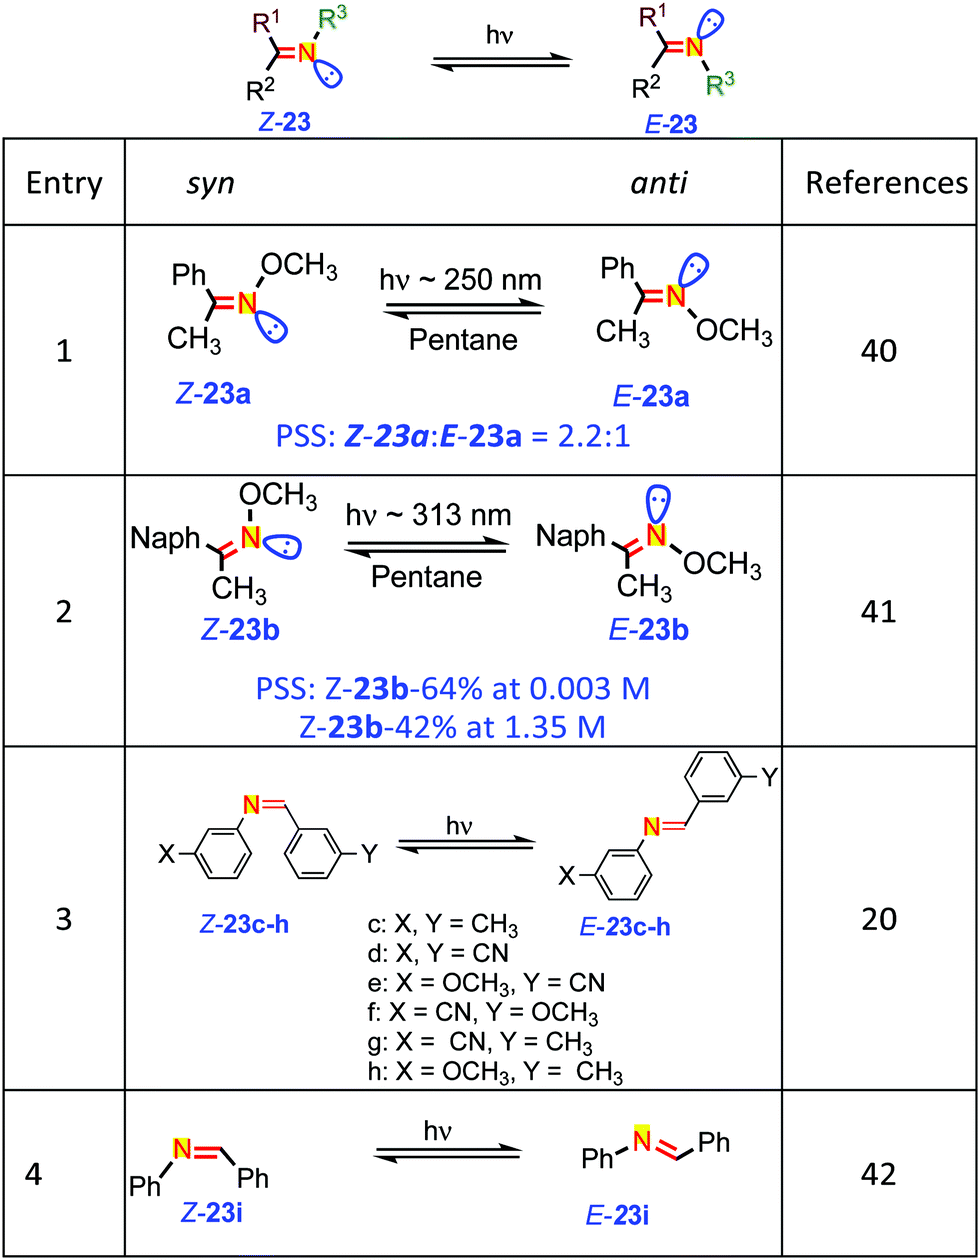 Taming The Excited State Reactivity Of Imines From Non Radiative Decay To Aza Paterno Buchi Reaction Chemical Society Reviews Rsc Publishing Doi 10 1039 D0csj